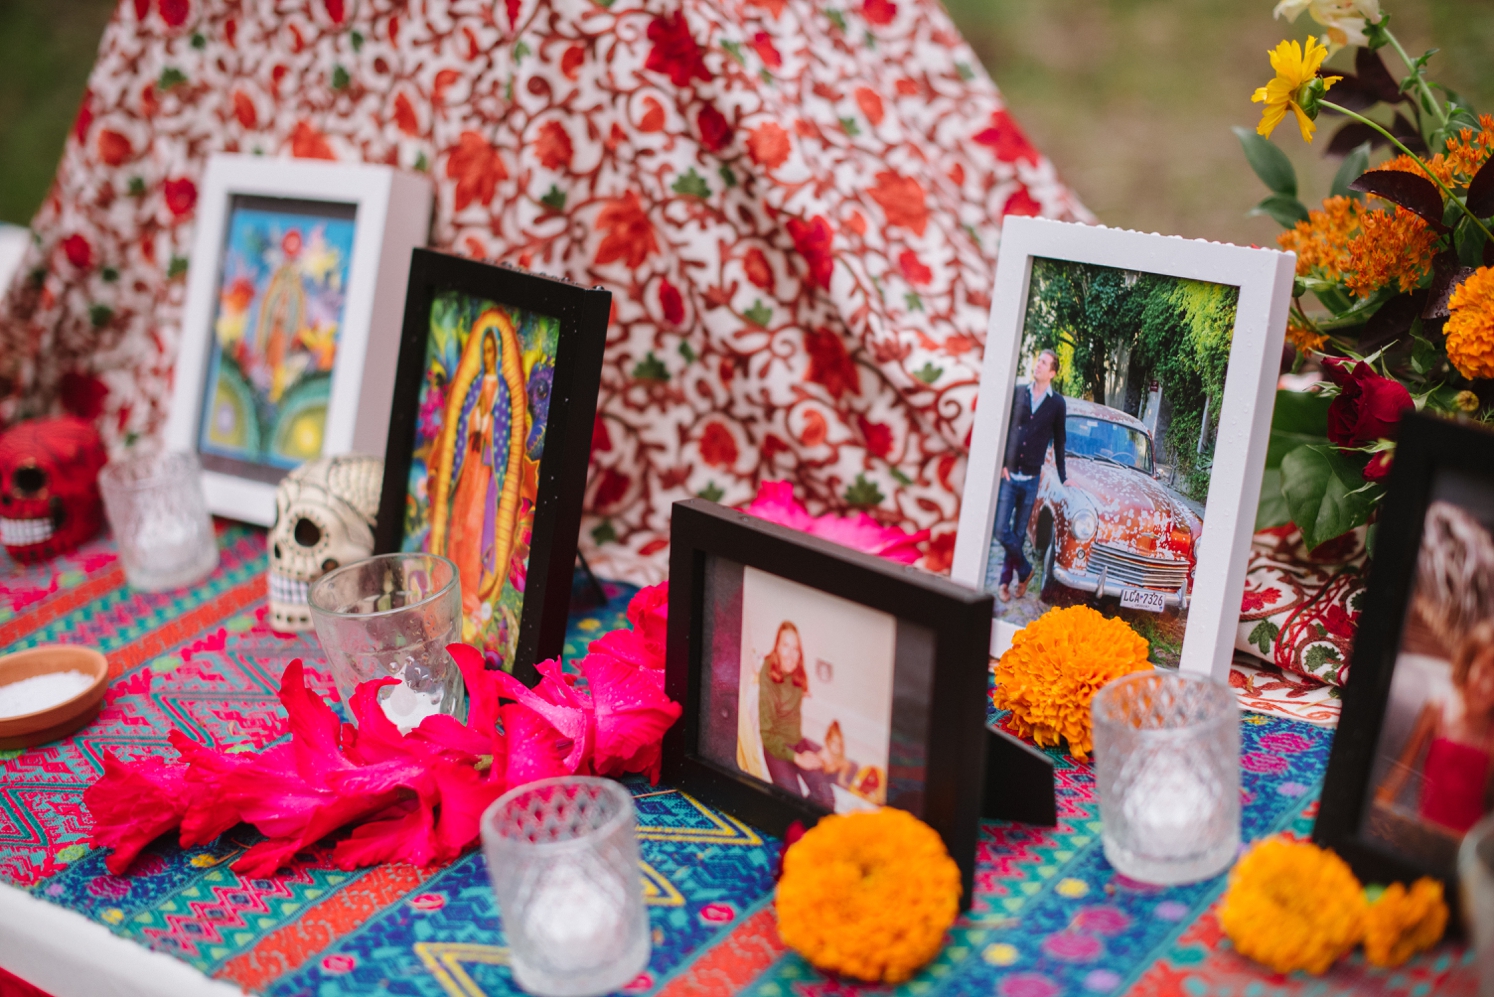 Photos, candles, and marigolds on Mexican ofrenda at wedding ceremony | McArthur Weddings and Events